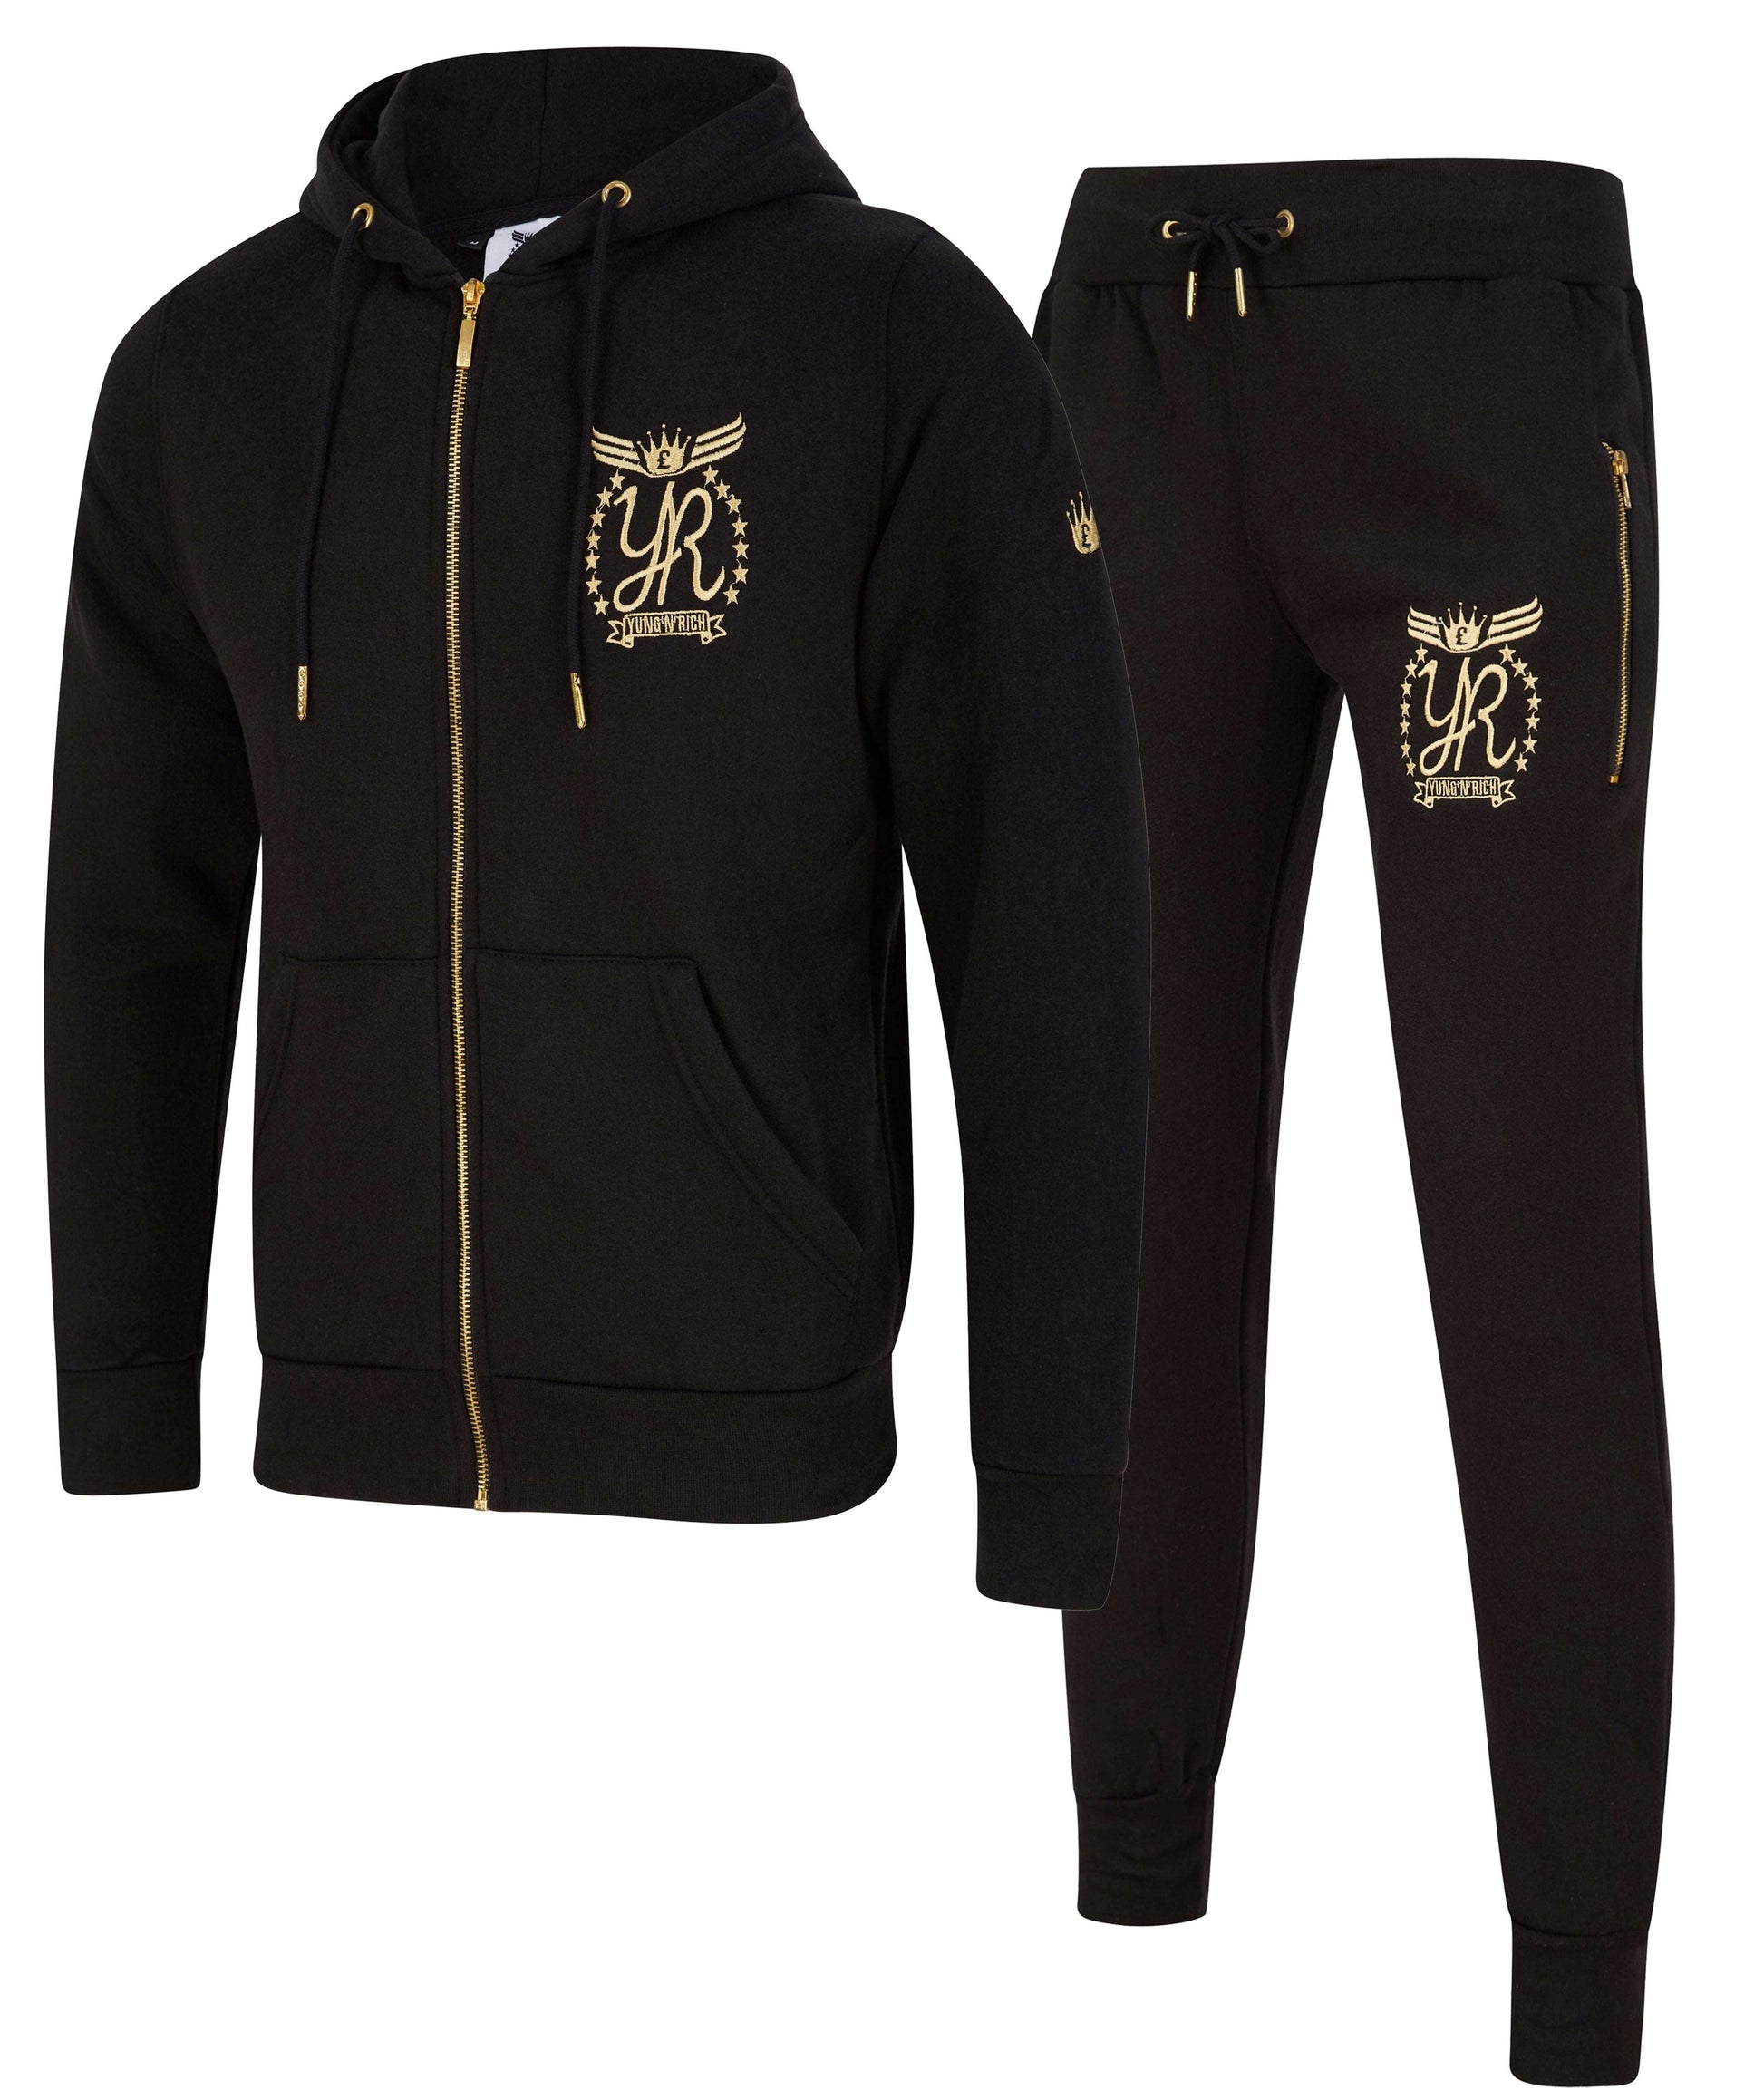 YUNG'N'RICH premium black tracksuit with distinctive gold zipper details. The hoodie and jogger pants set features the iconic 'YR' logo in gold, embellished with wings and a crown, symbolizing the brand's upscale streetwear essence. The elegant design and color scheme reflect the brand's commitment to combining luxury with the casual comfort of street fashion.